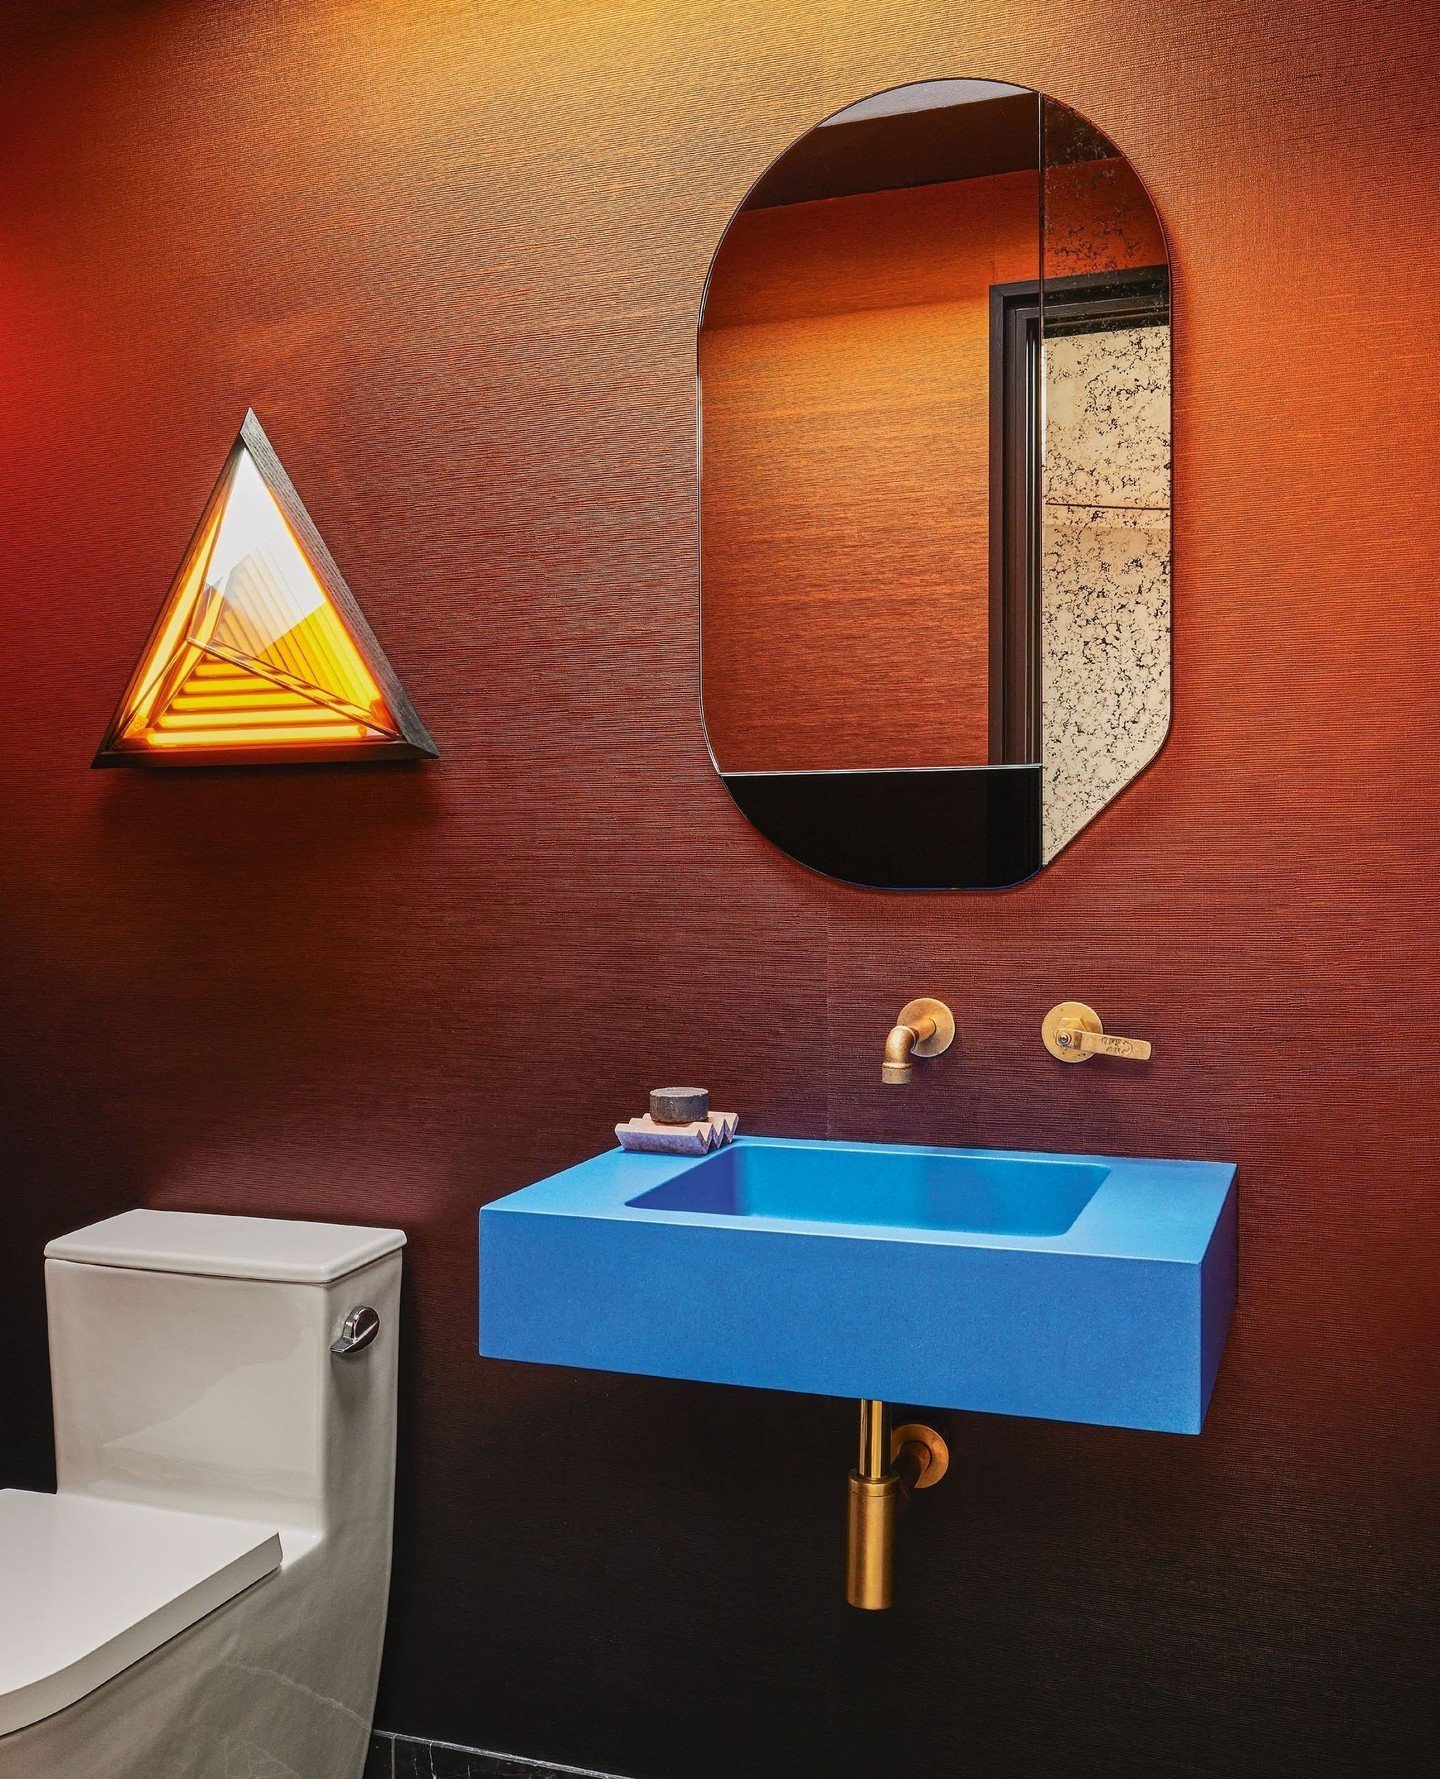 A bathroom space full of artful, fun and saturated pops. As seen in @livingetc⁠ &quot;We always try to go for maximal impact in a small space. Here, we claud the walls in the most sultry bronze wallpaper and juxtapose it with an electric-blue concret